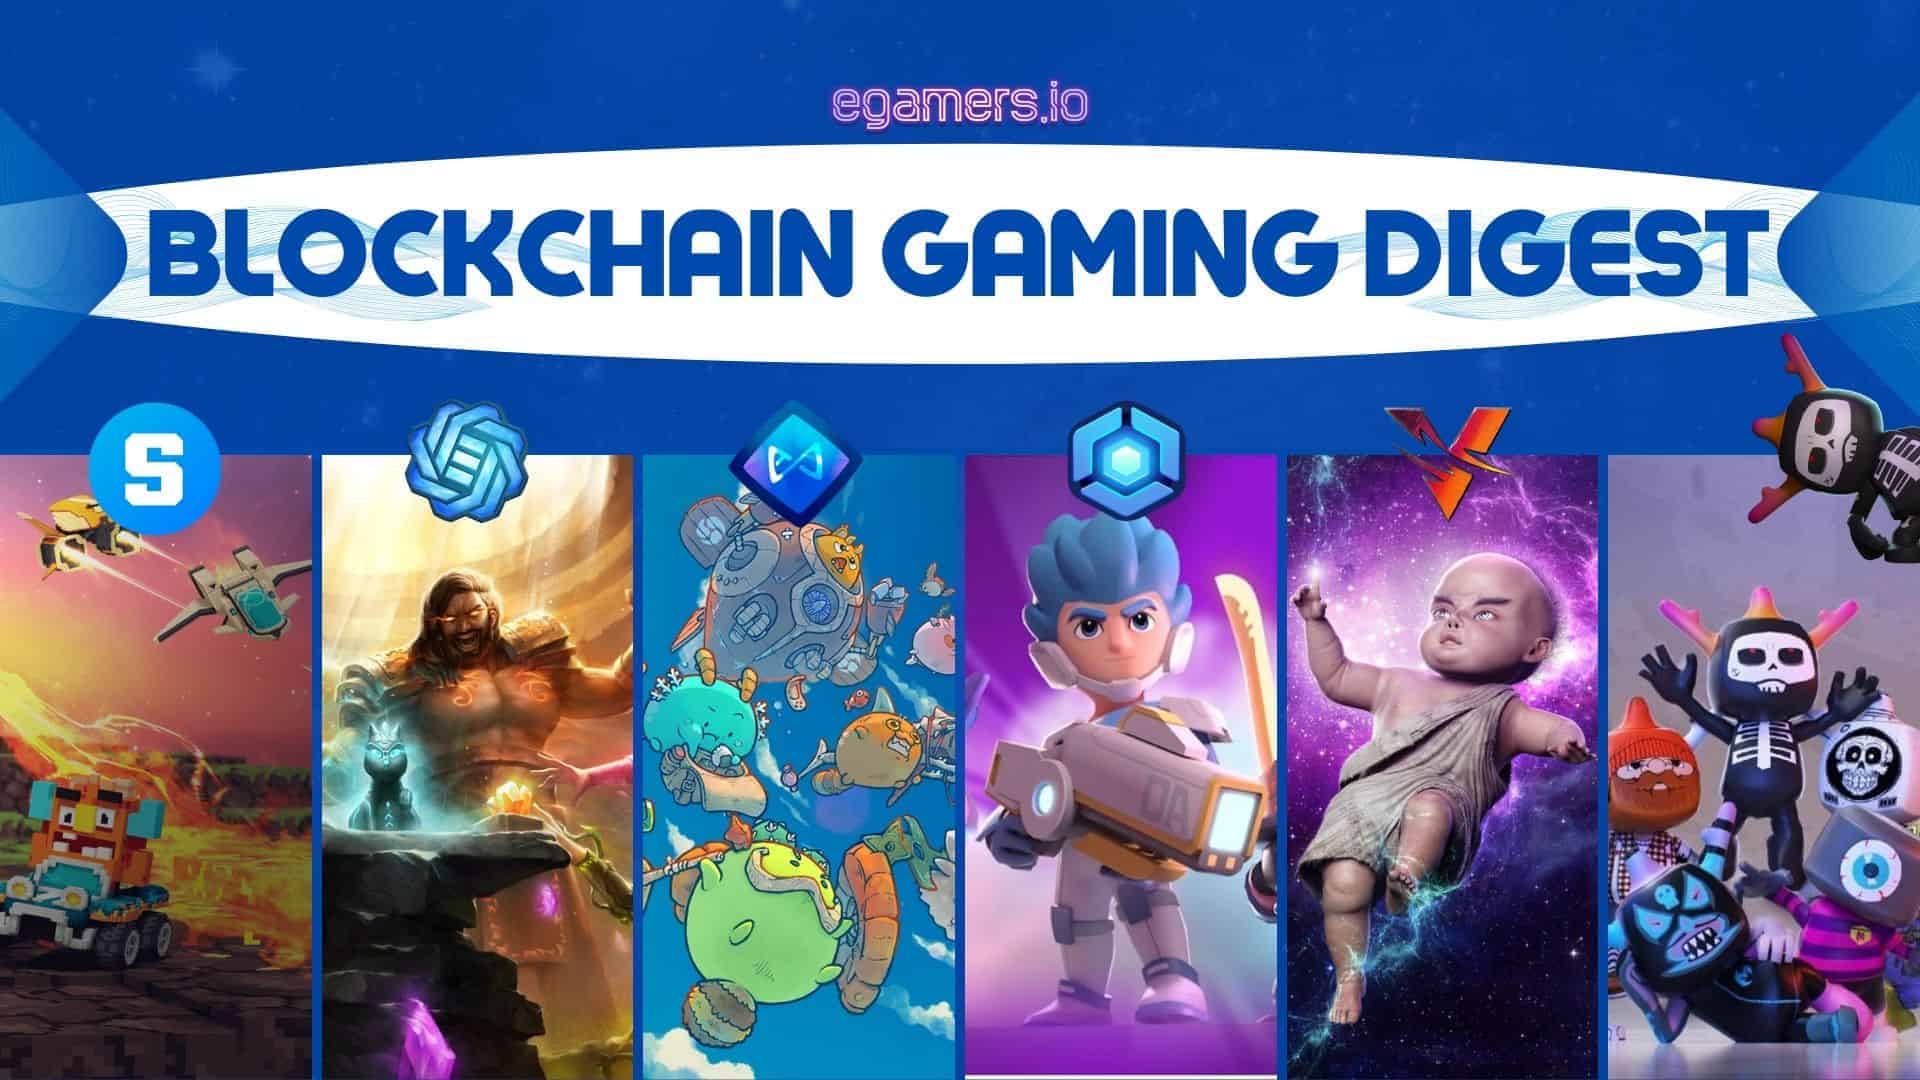 BLOCKCHAIN GAMING DIGEST new Welcome to the Blockchain Gaming Digest March 22-27/2021.